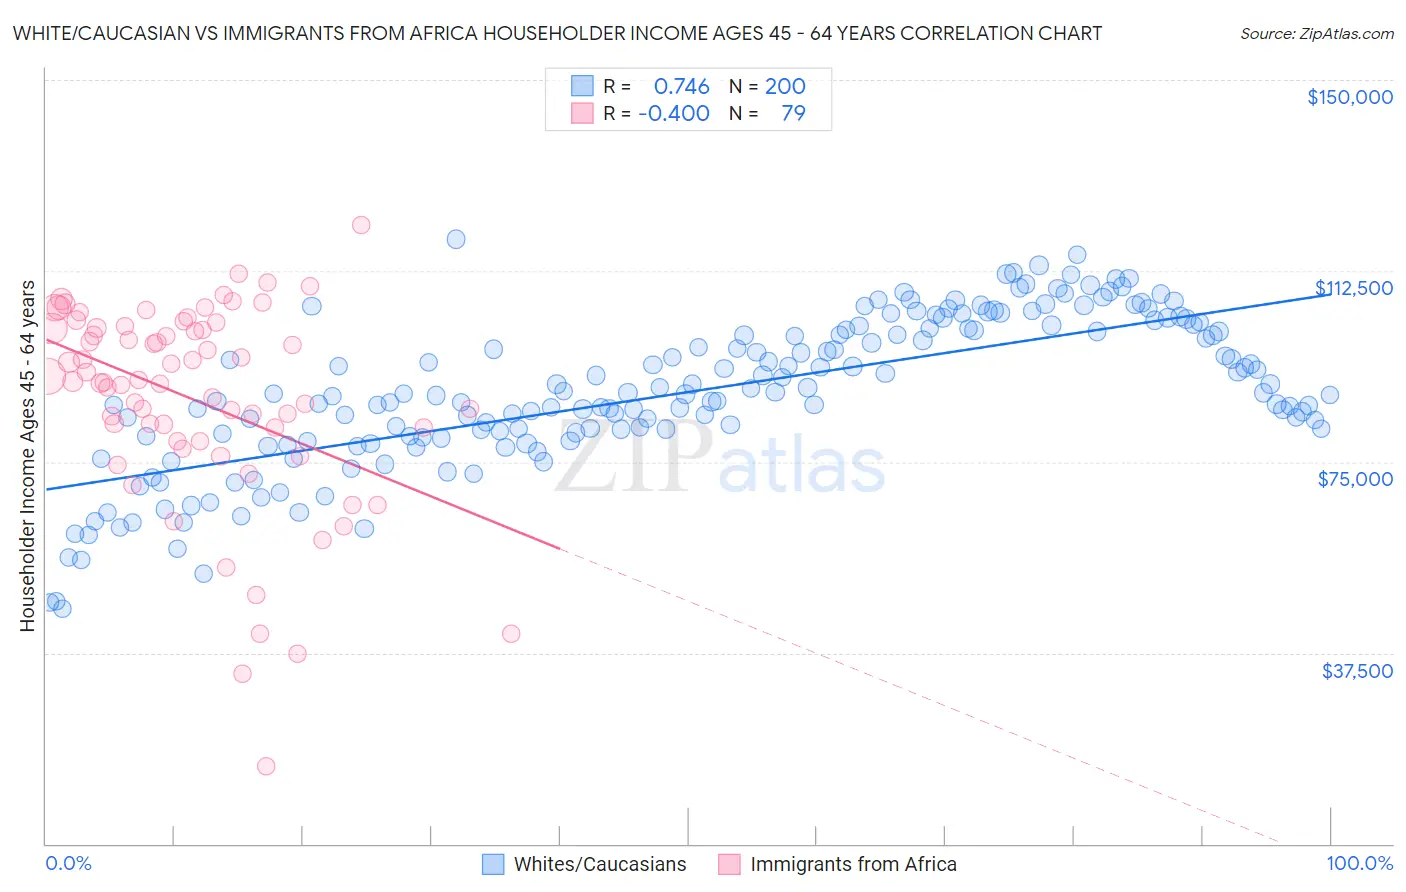 White/Caucasian vs Immigrants from Africa Householder Income Ages 45 - 64 years